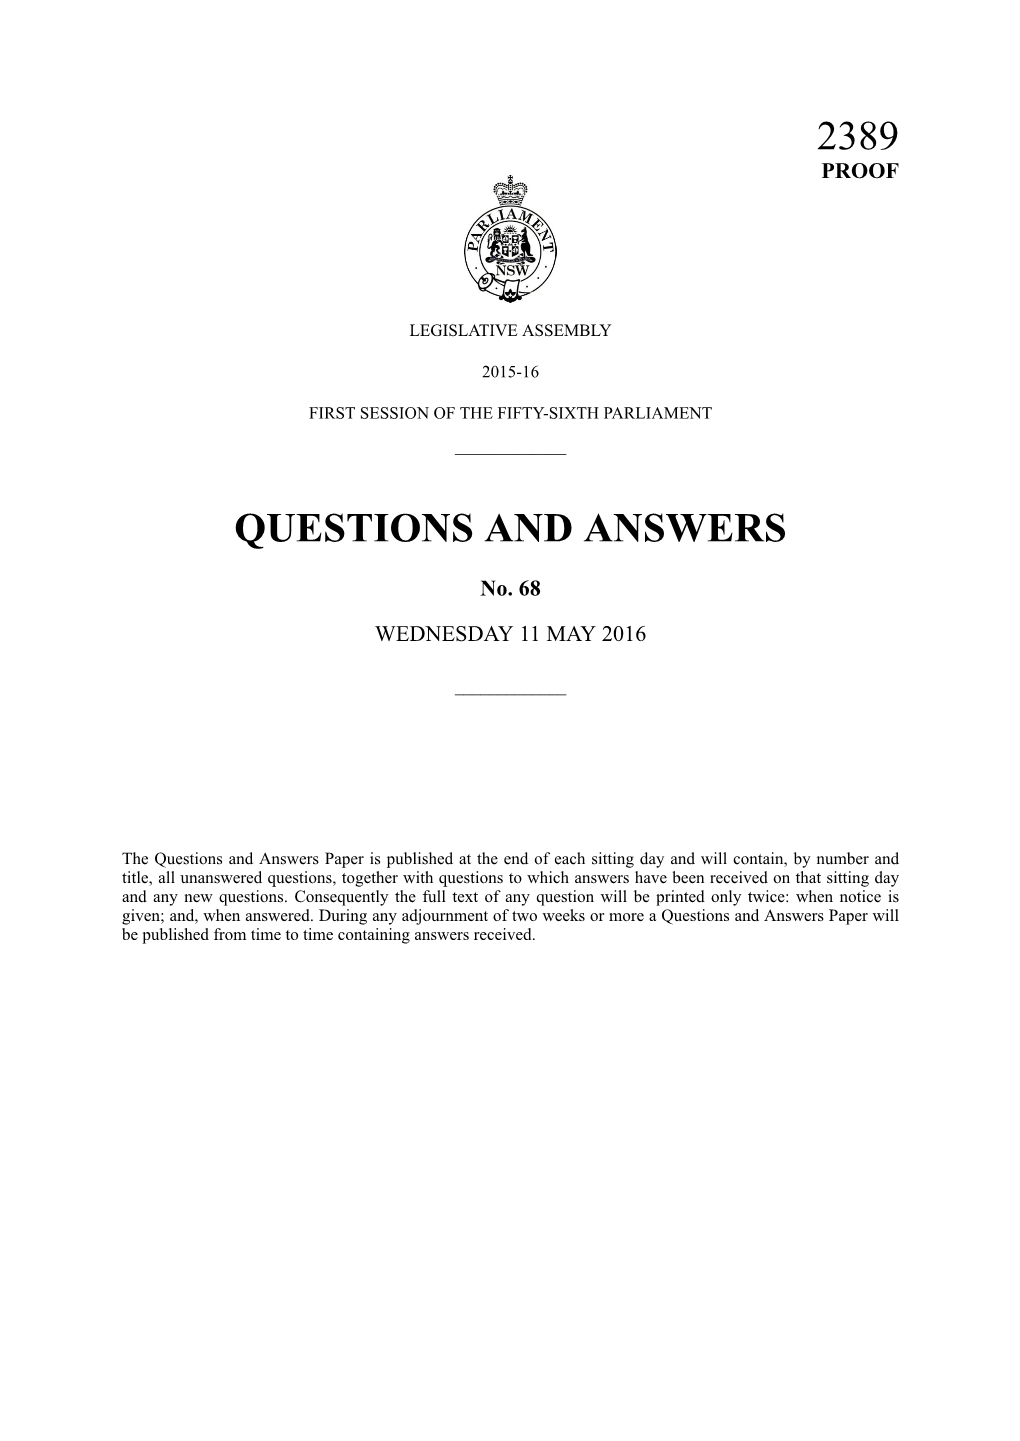 Questions and Answers 2389